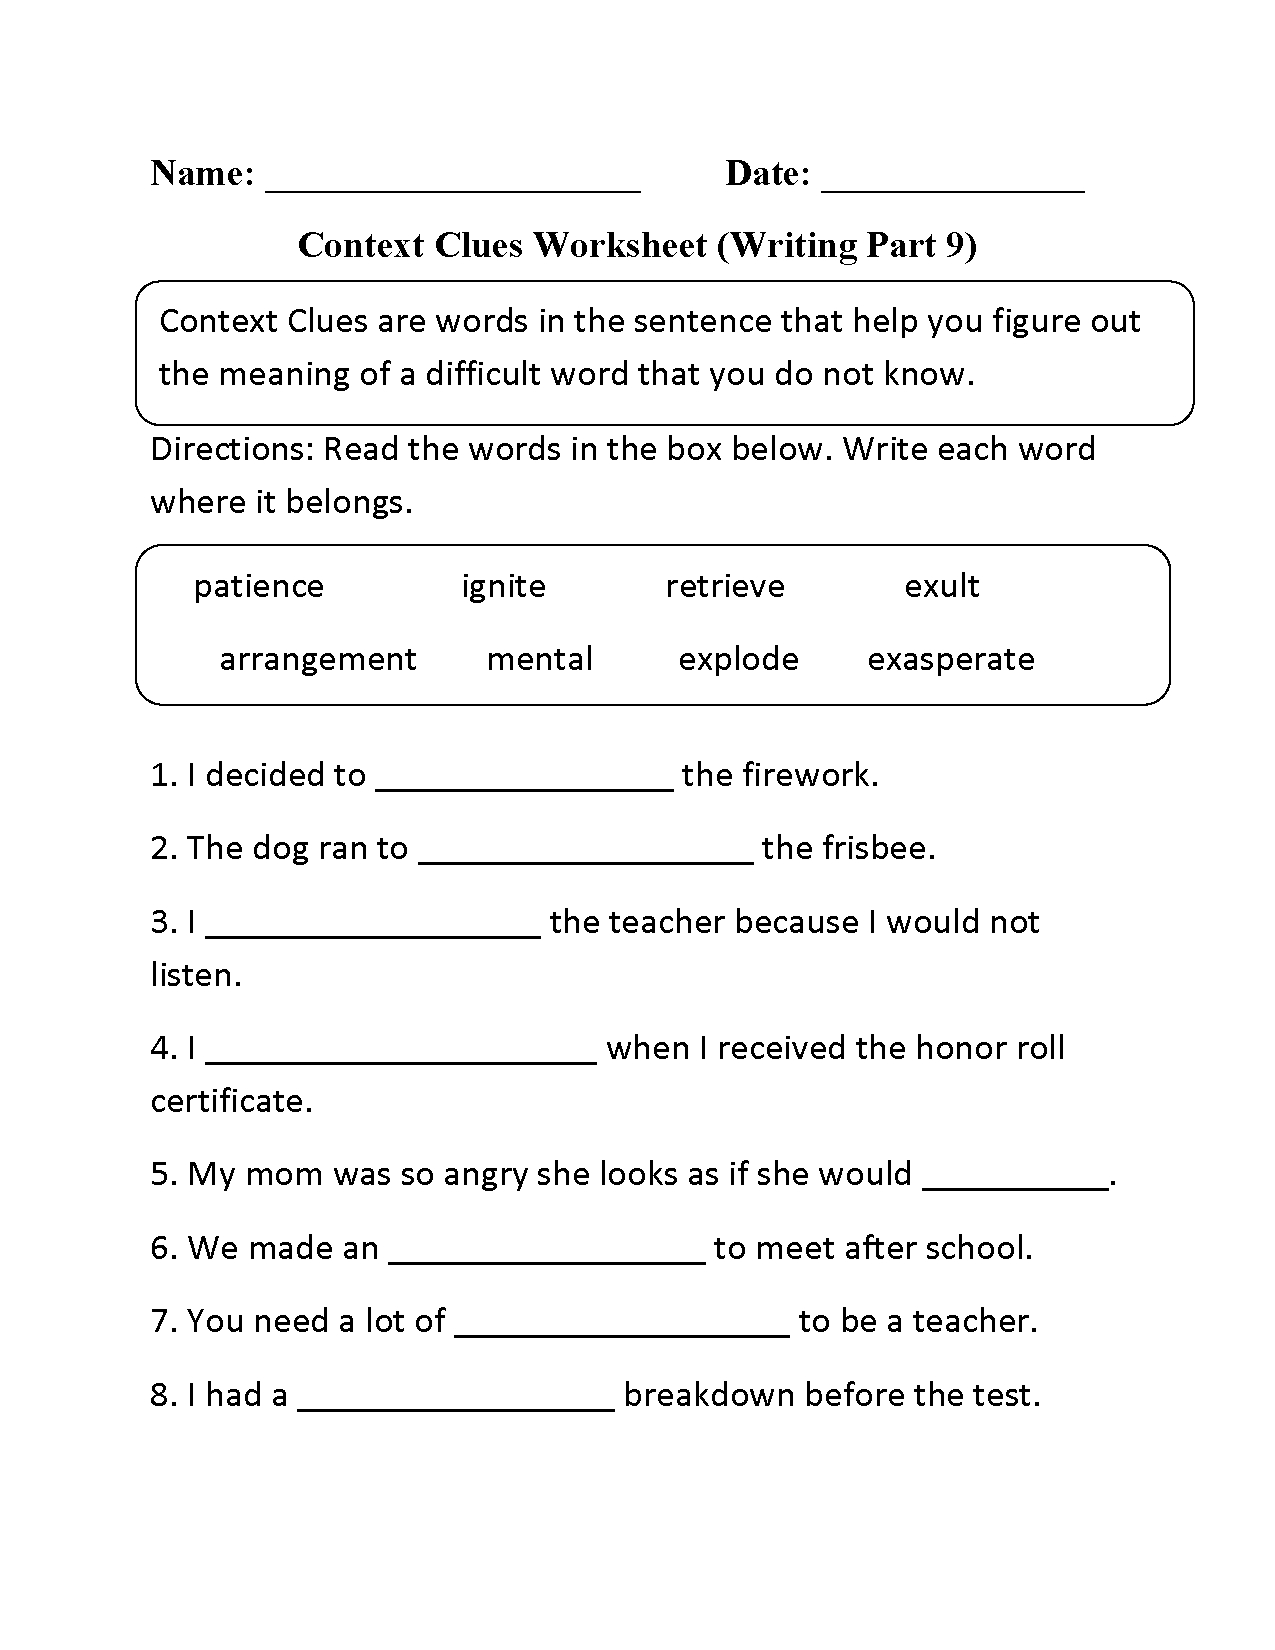 Context Clues Worksheet Writing Part 9 Intermediate | Context Clues | Grade 7 Vocabulary Worksheets Printable